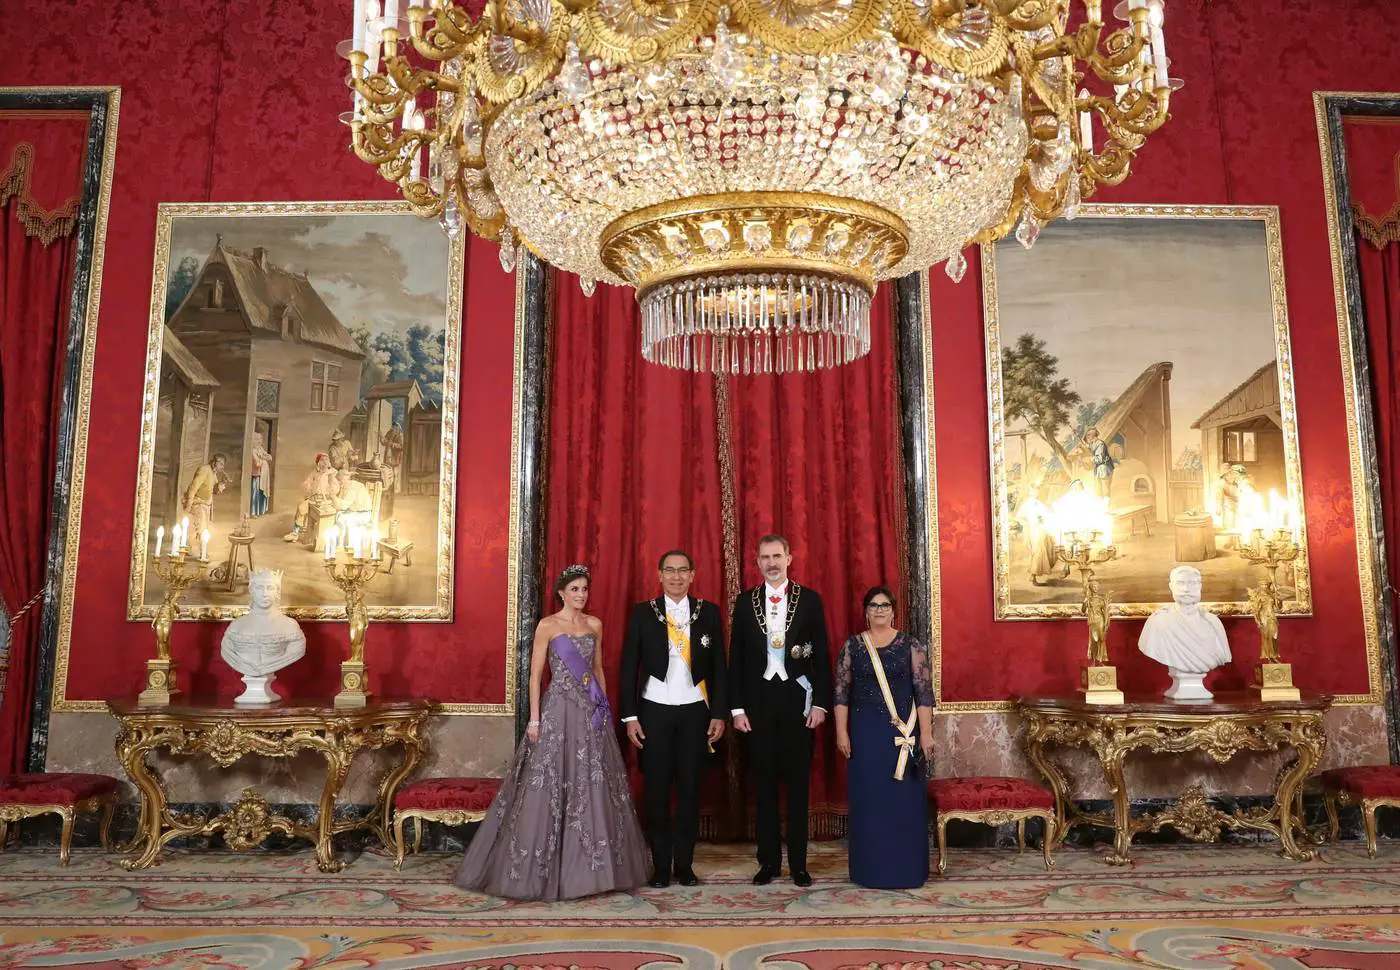 At the gala dinner, Queen Letizia brought back the beautiful memories of the April 2011 Royal Wedding of Prince William and Catherine Middleton with her gown.